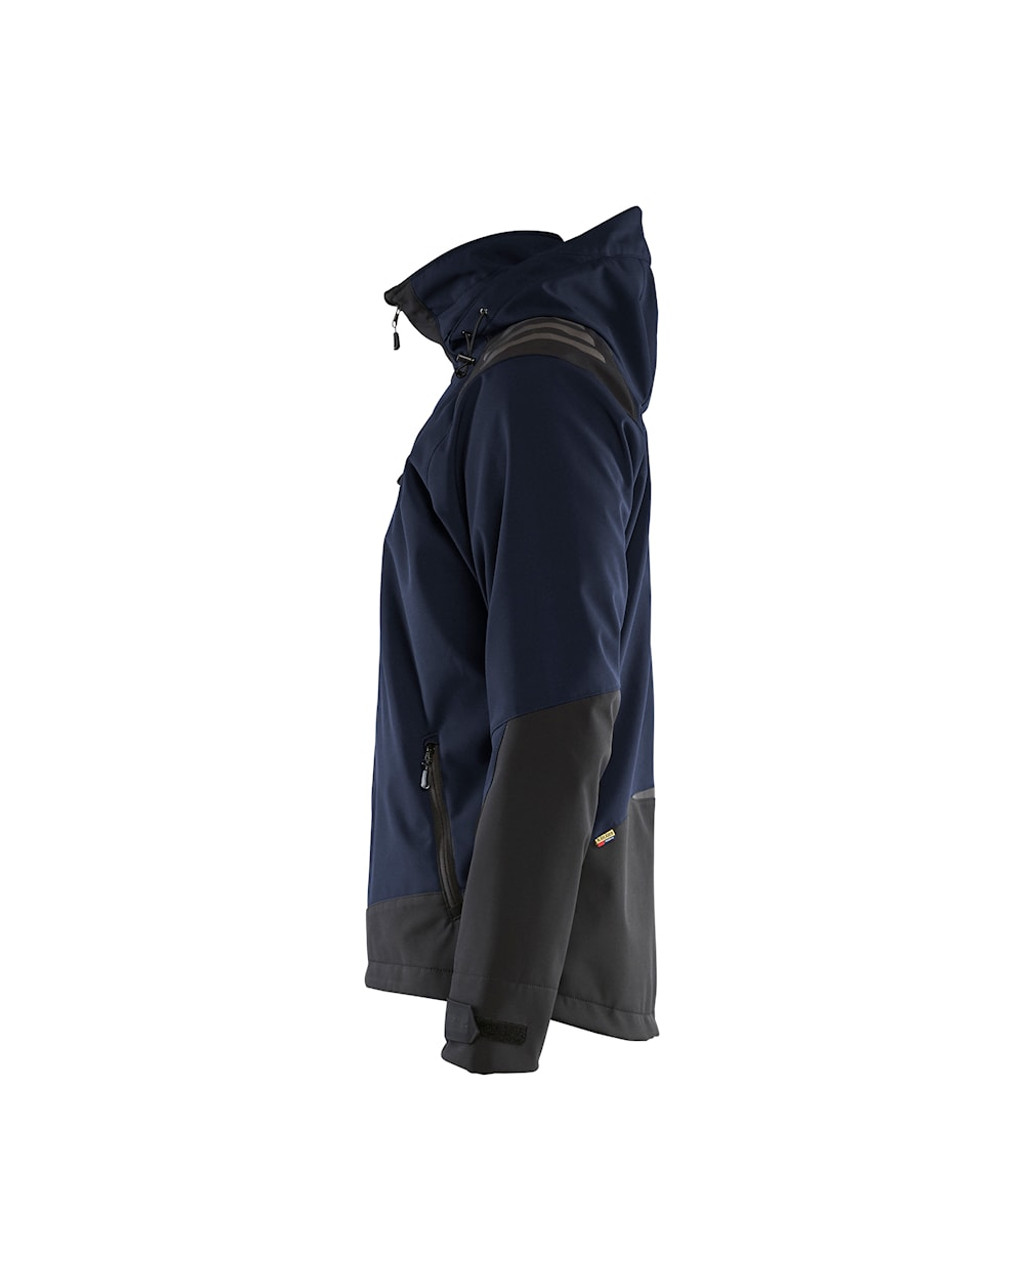 BLAKLADER Softshell Dark Navy Blue  Jacket  for Carpenters that have Full Zip Waterproof  available in Australia and New Zealand